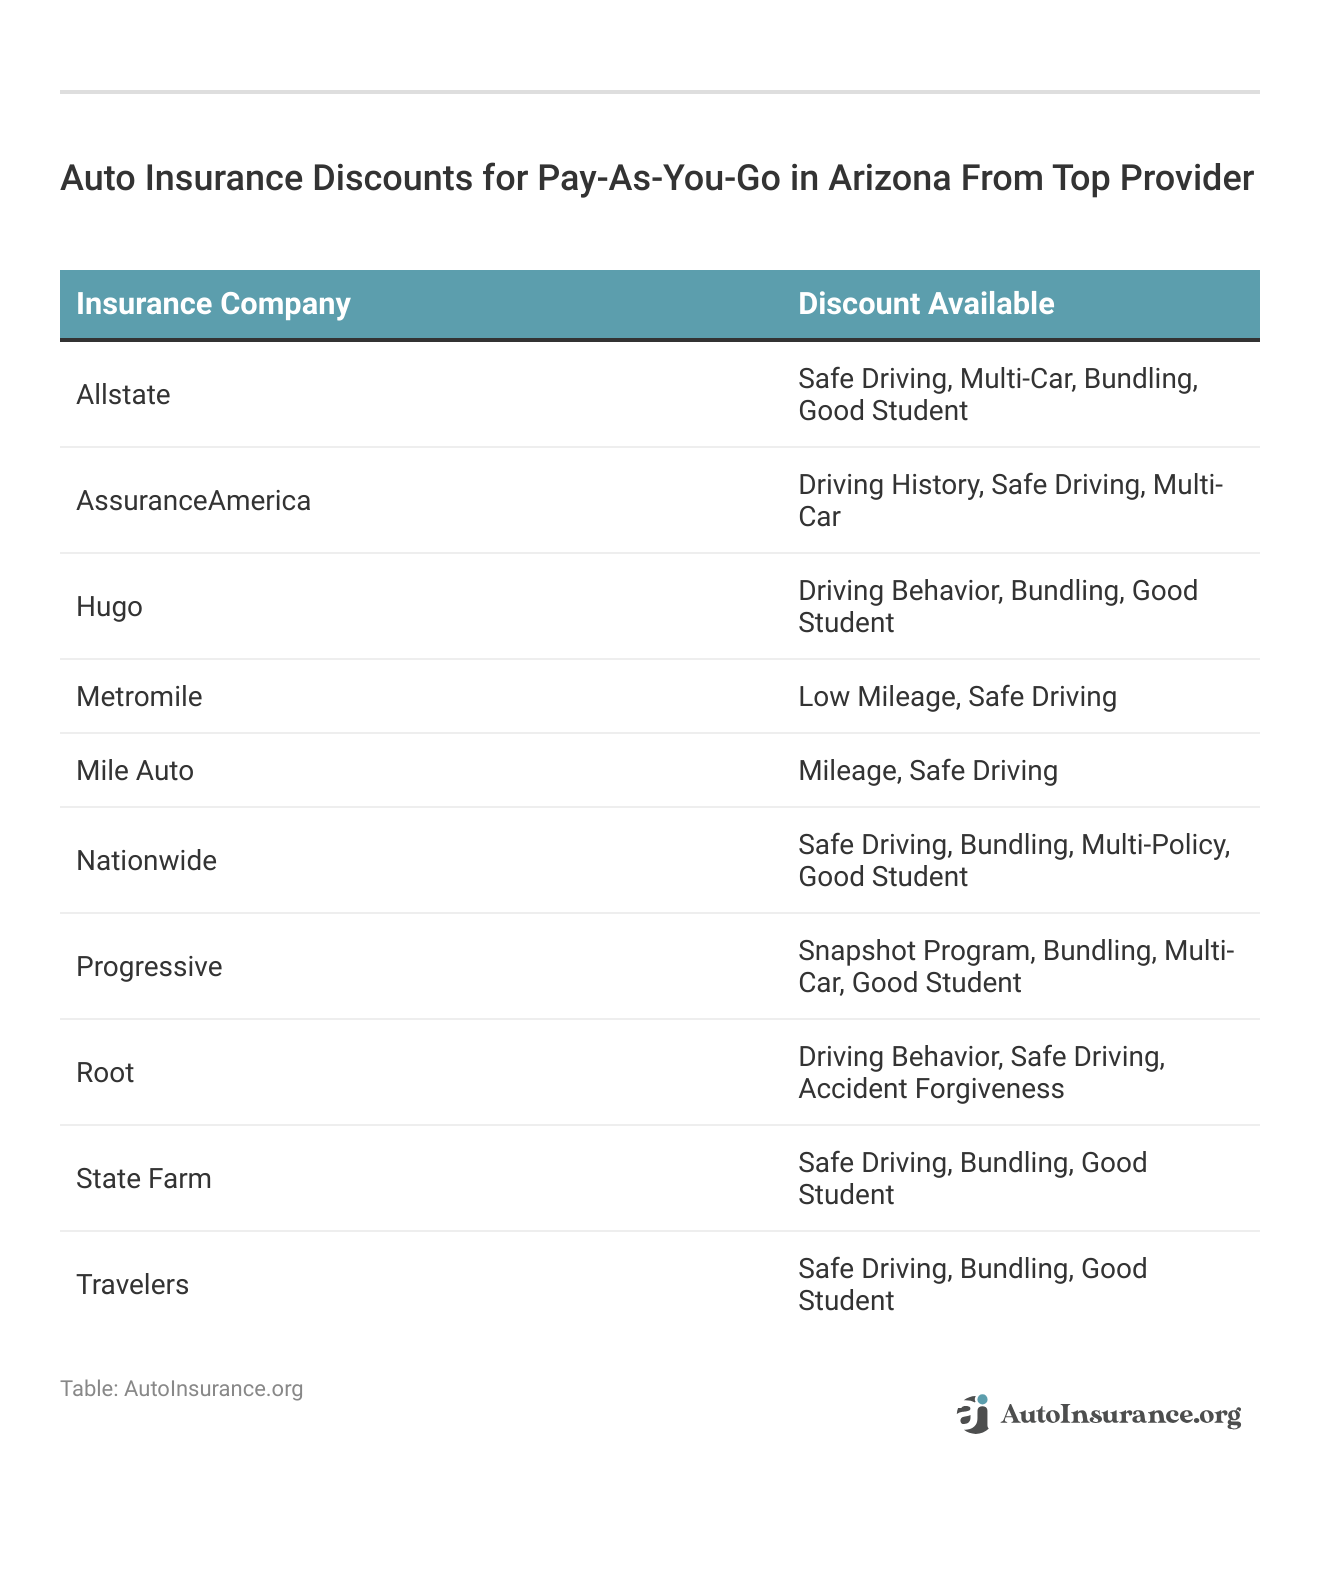 <h3>Auto Insurance Discounts for Pay-As-You-Go in Arizona From Top Provider</h3>